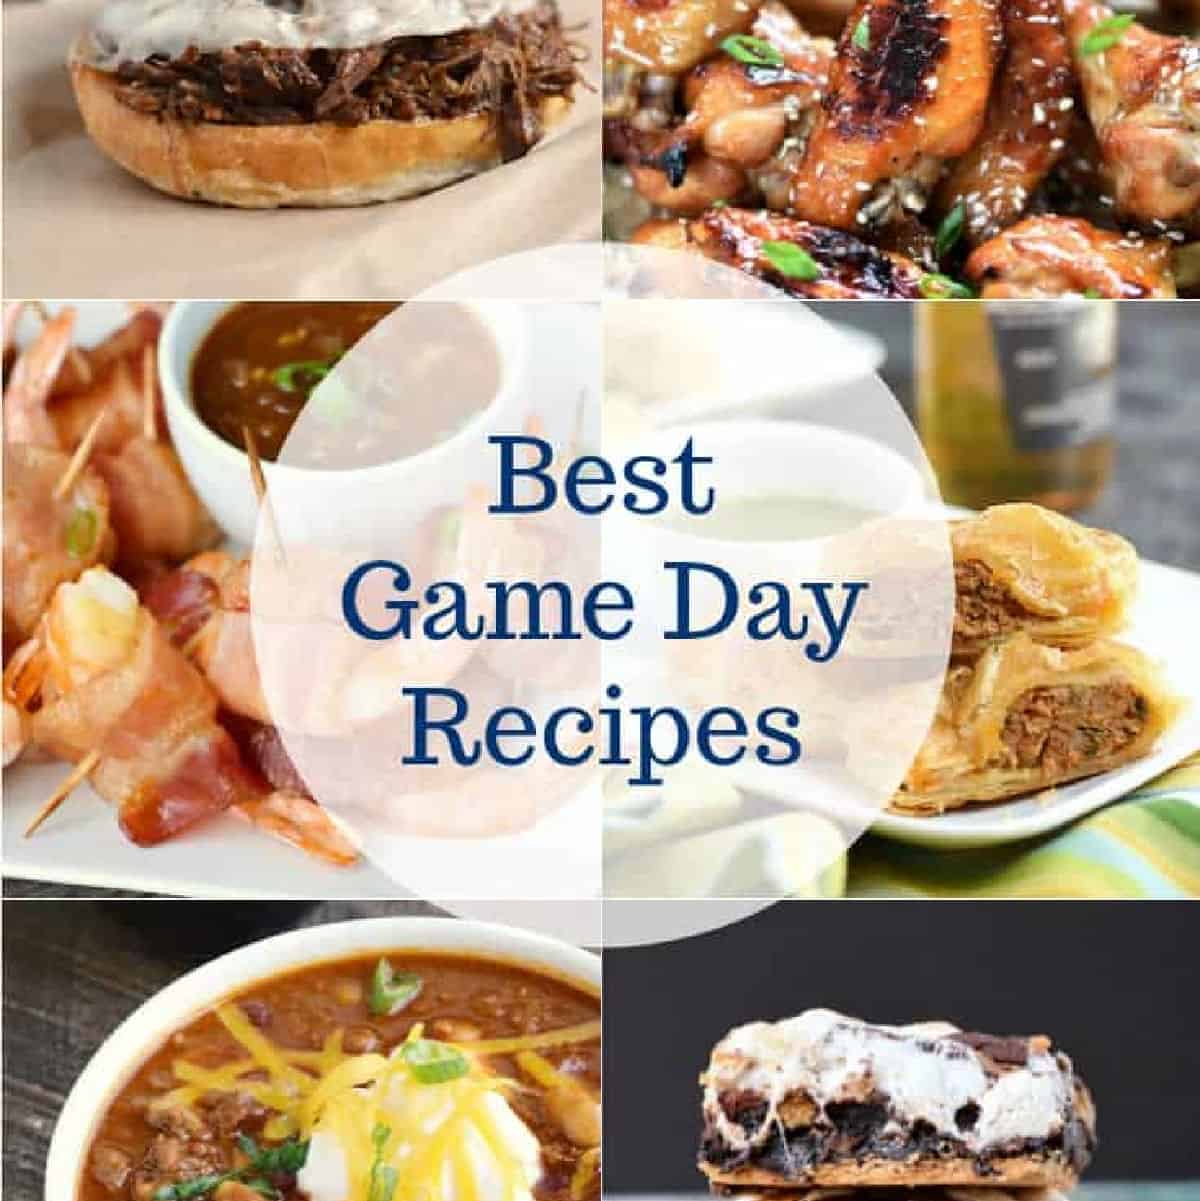 Best Game Day Recipes